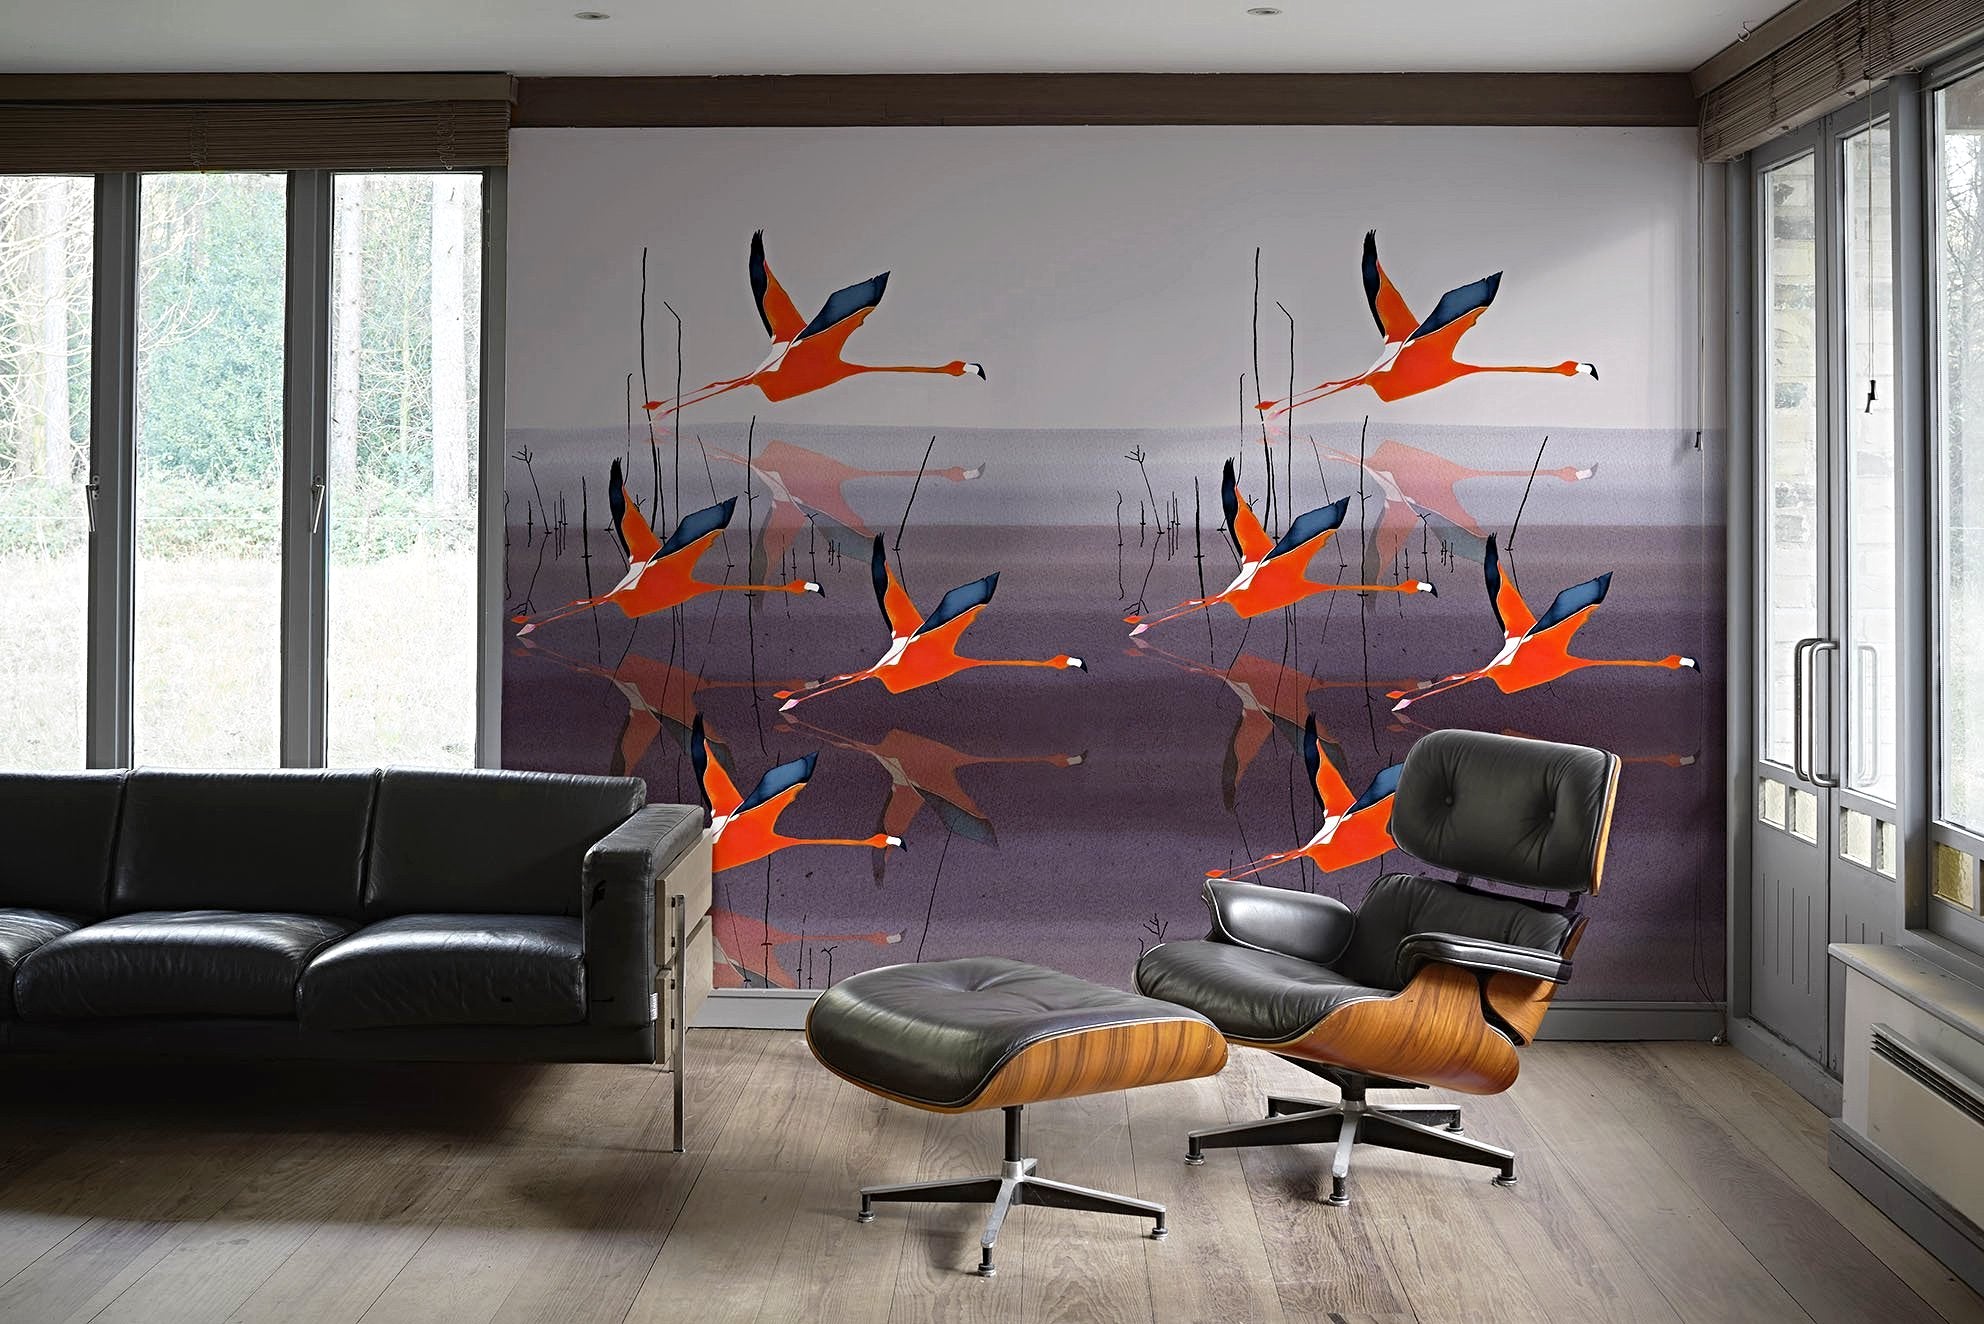 Breaking Dawn in Orange mural wallpaper by Anna Jacobs, lifestyle image in mid century modern apartrment